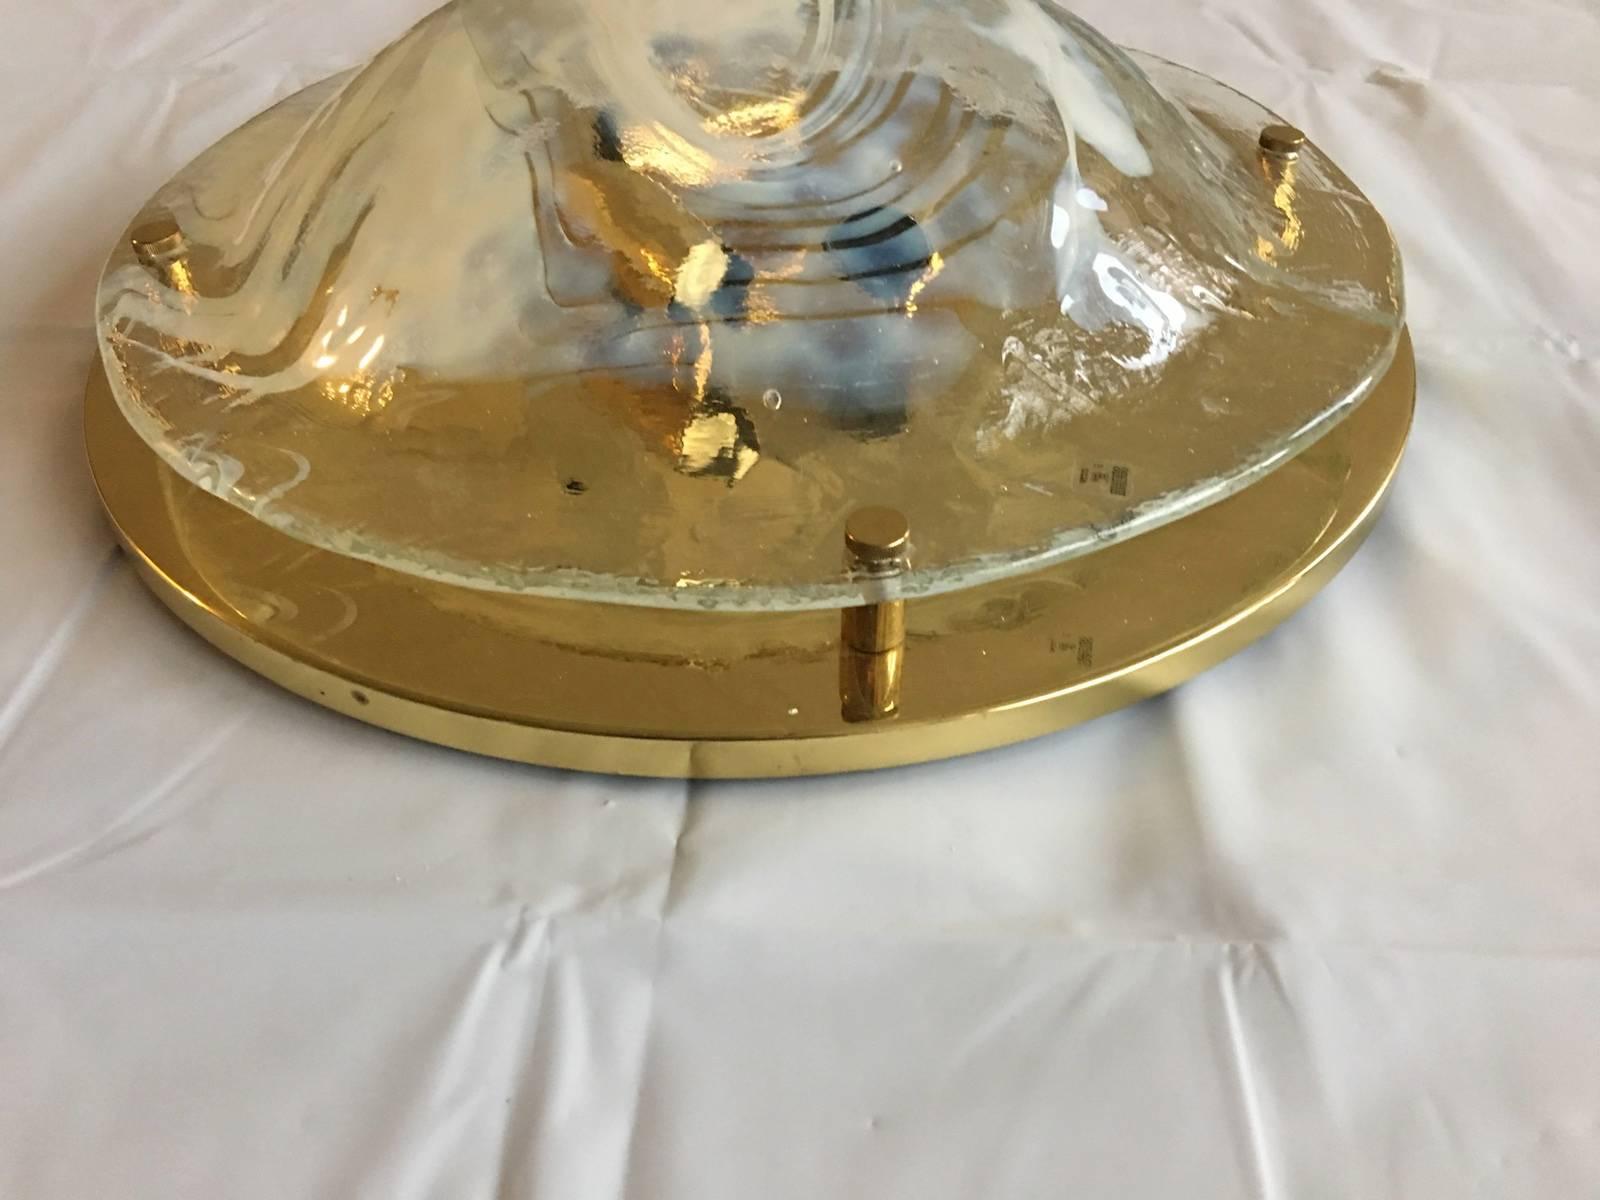 A beautiful Mid-Century Italian round Murano glass flush mount  with brass hardware for interior lights.
The fixture requires three European E 14 candelabra bulbs, each bulb up to 60 watts.
Unique and beautiful item